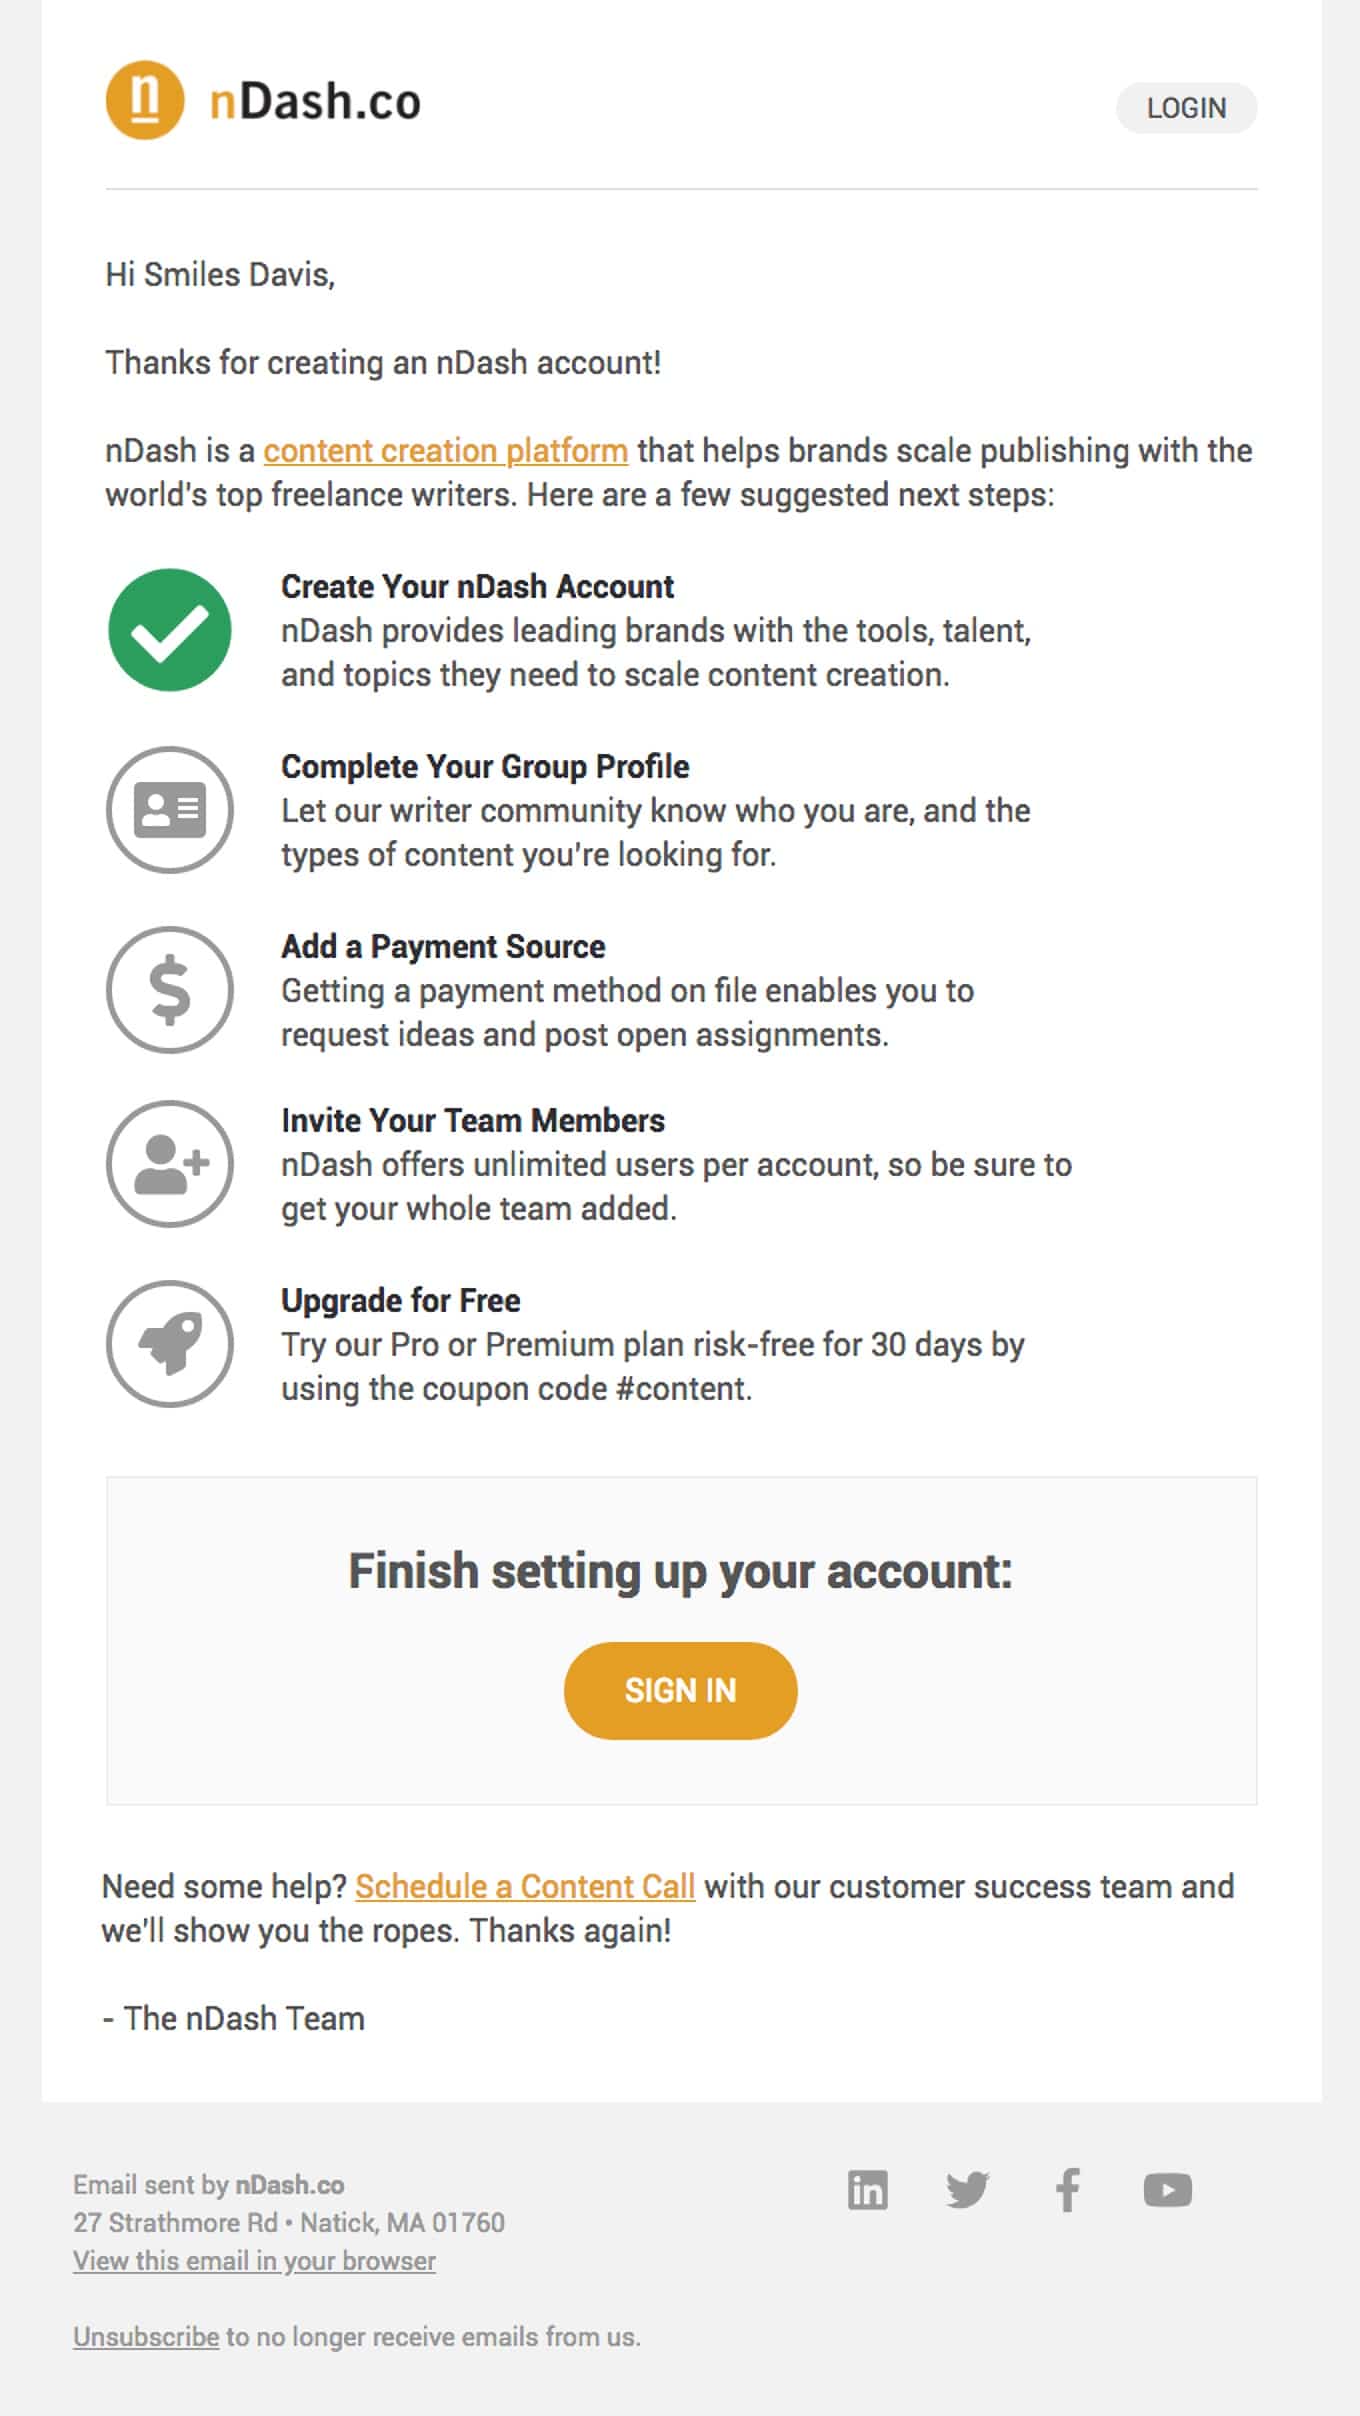 nDash Sends Welcome Email After Account Creation